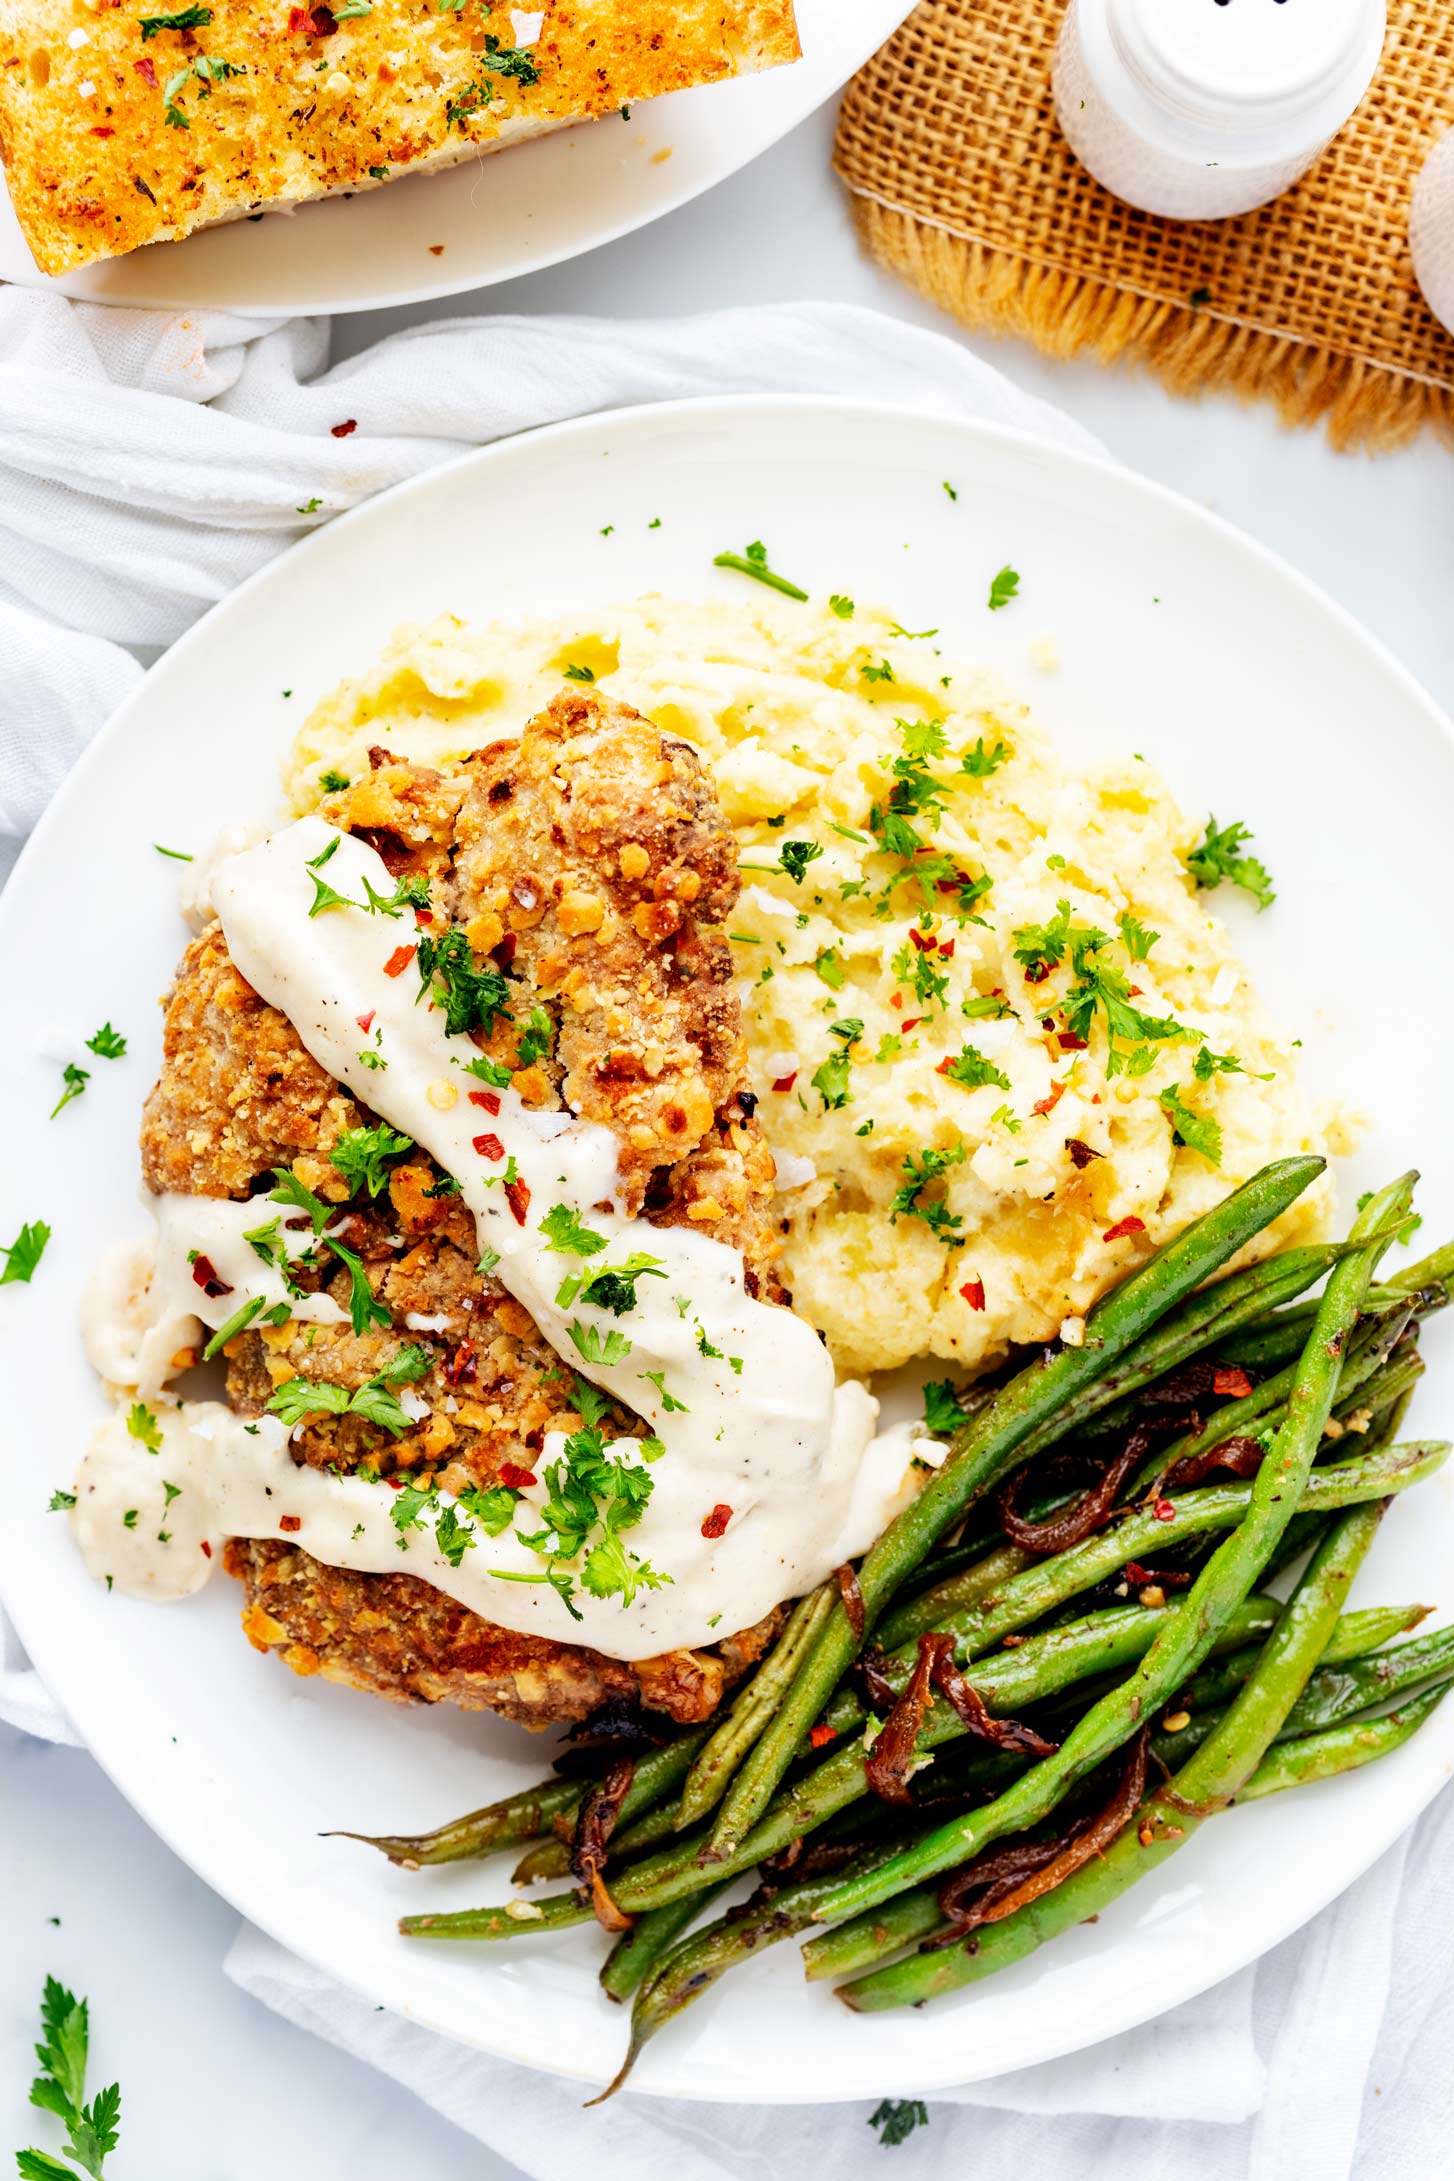 Overhead photo of a white plate with air fryer chicken fried steak and gravy over a bed of mashed potatoes with green beans.